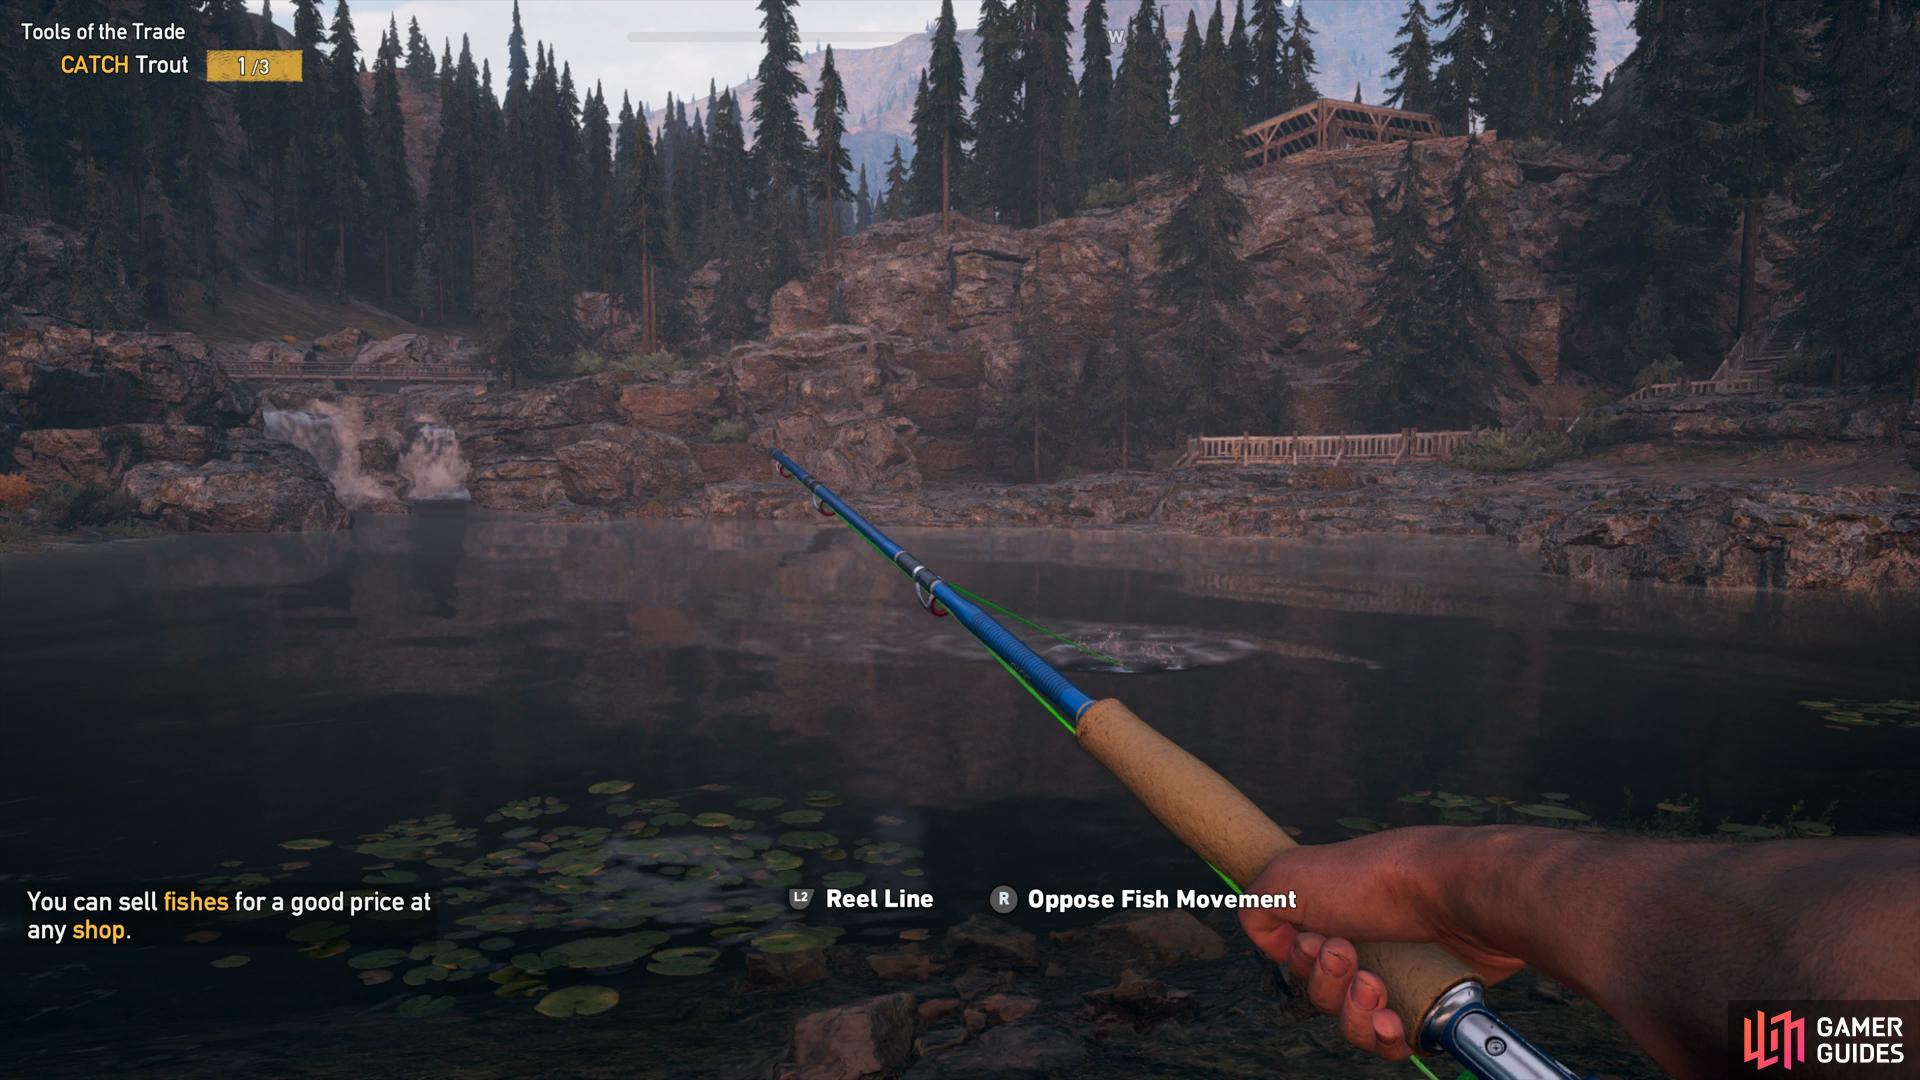 Pull the rod in the opposite direction of the fish to reel it in.